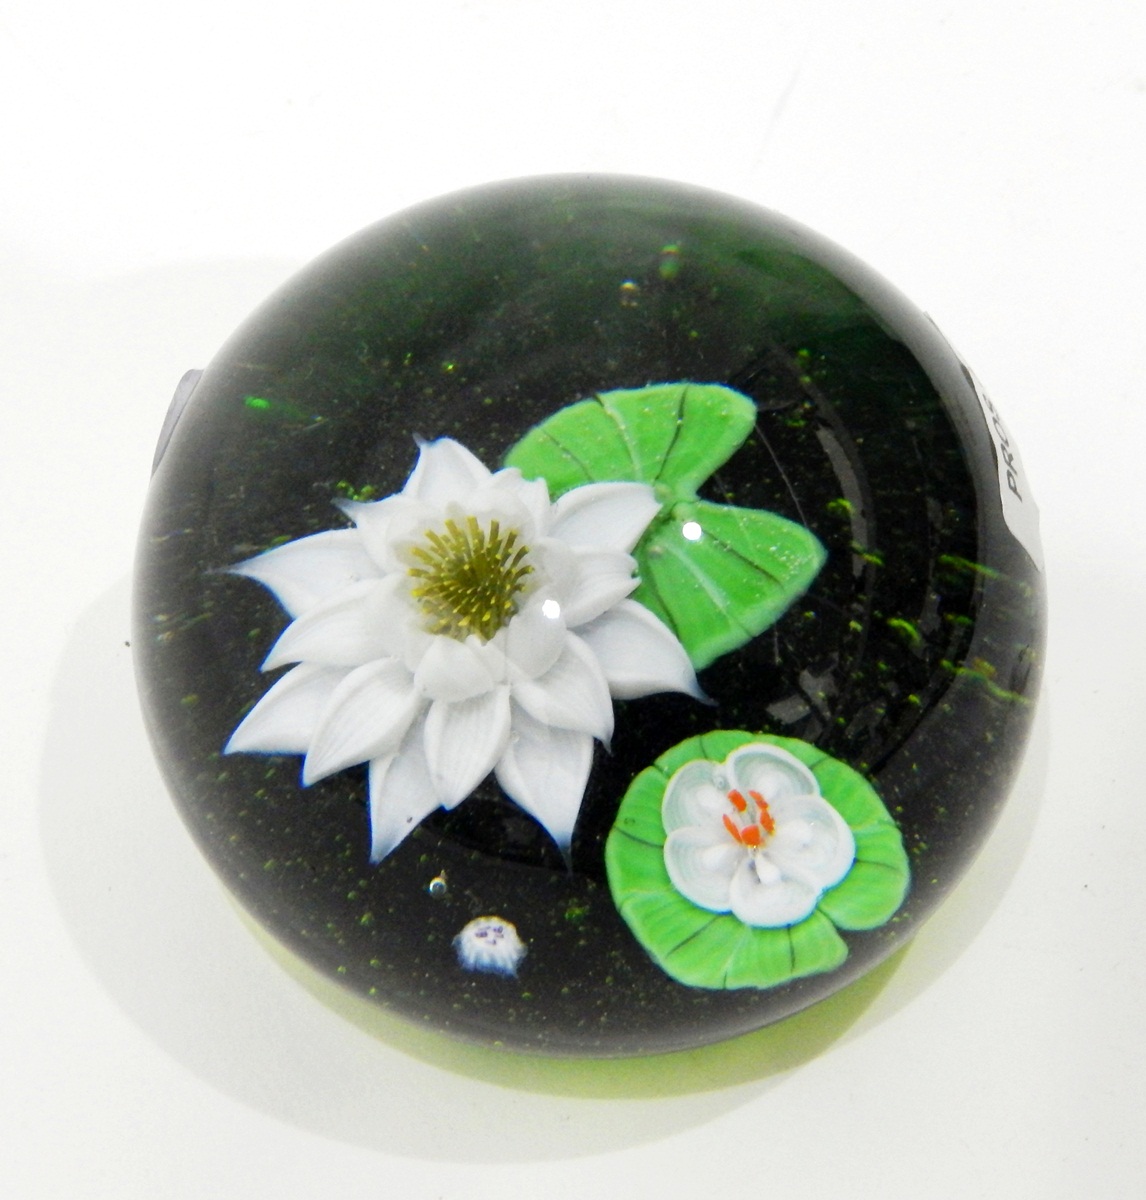 Limited edition glass paperweight by Baccarat of circular domed form depicting a water lily flower